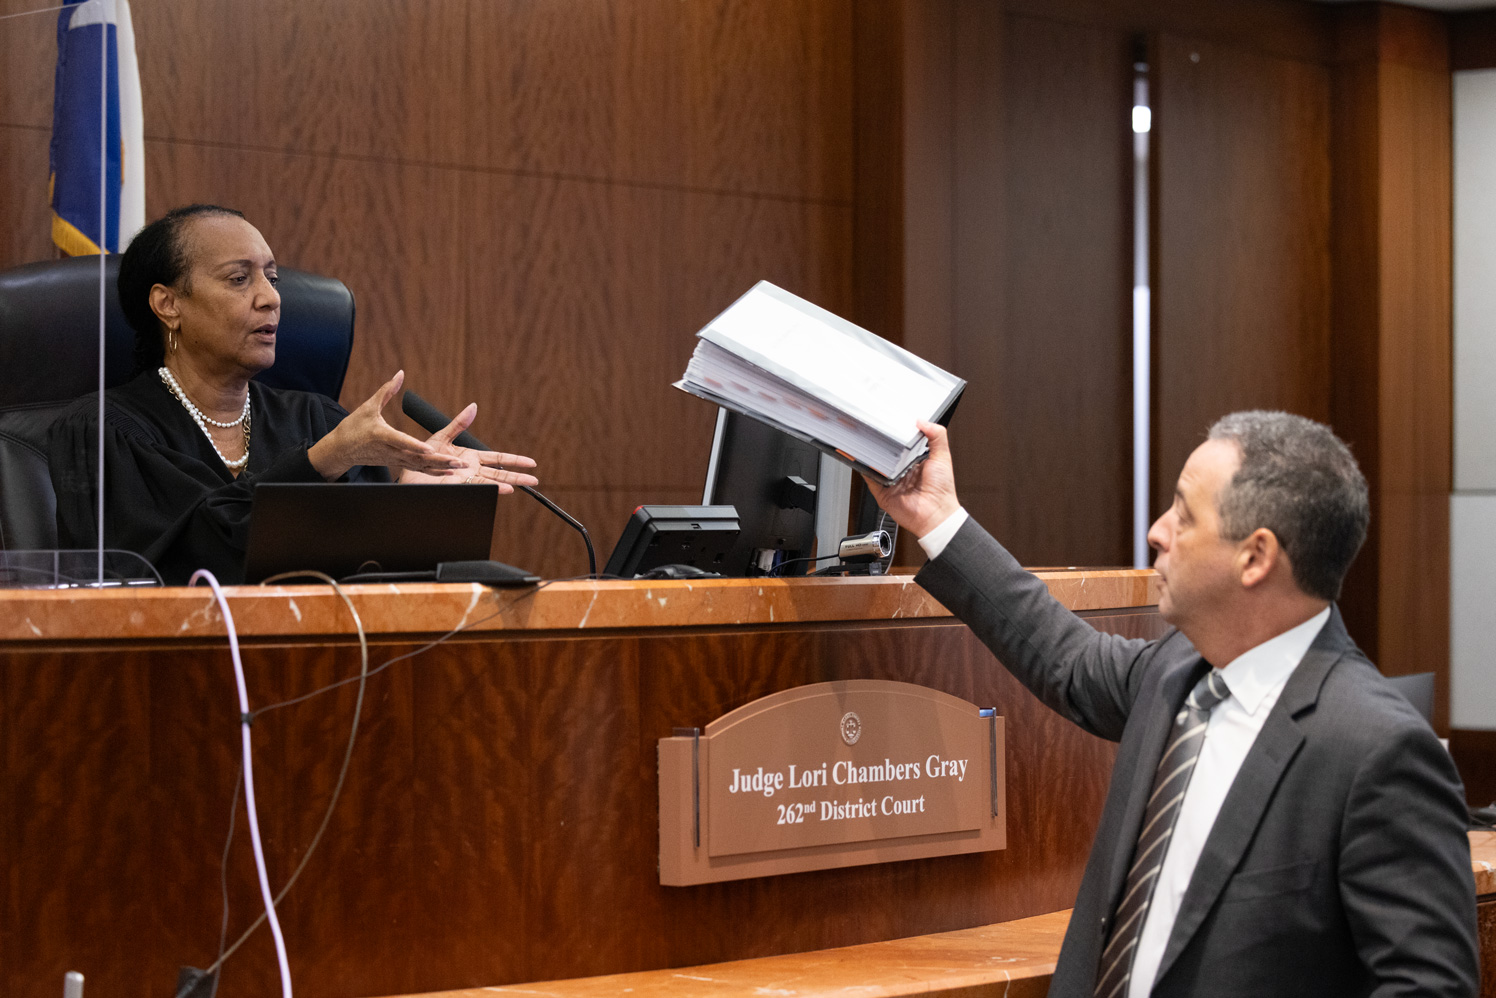 Joshua Reiss, a division chief with the Harris County district attorney's office, at right, hands Judge Lori Chambers Gray a copy of Syed Rabbani’s original trail transcript during a hearing for Rabbani at the Harris County Criminal Justice Center, Tuesday, Nov. 14, 2023, in Houston.